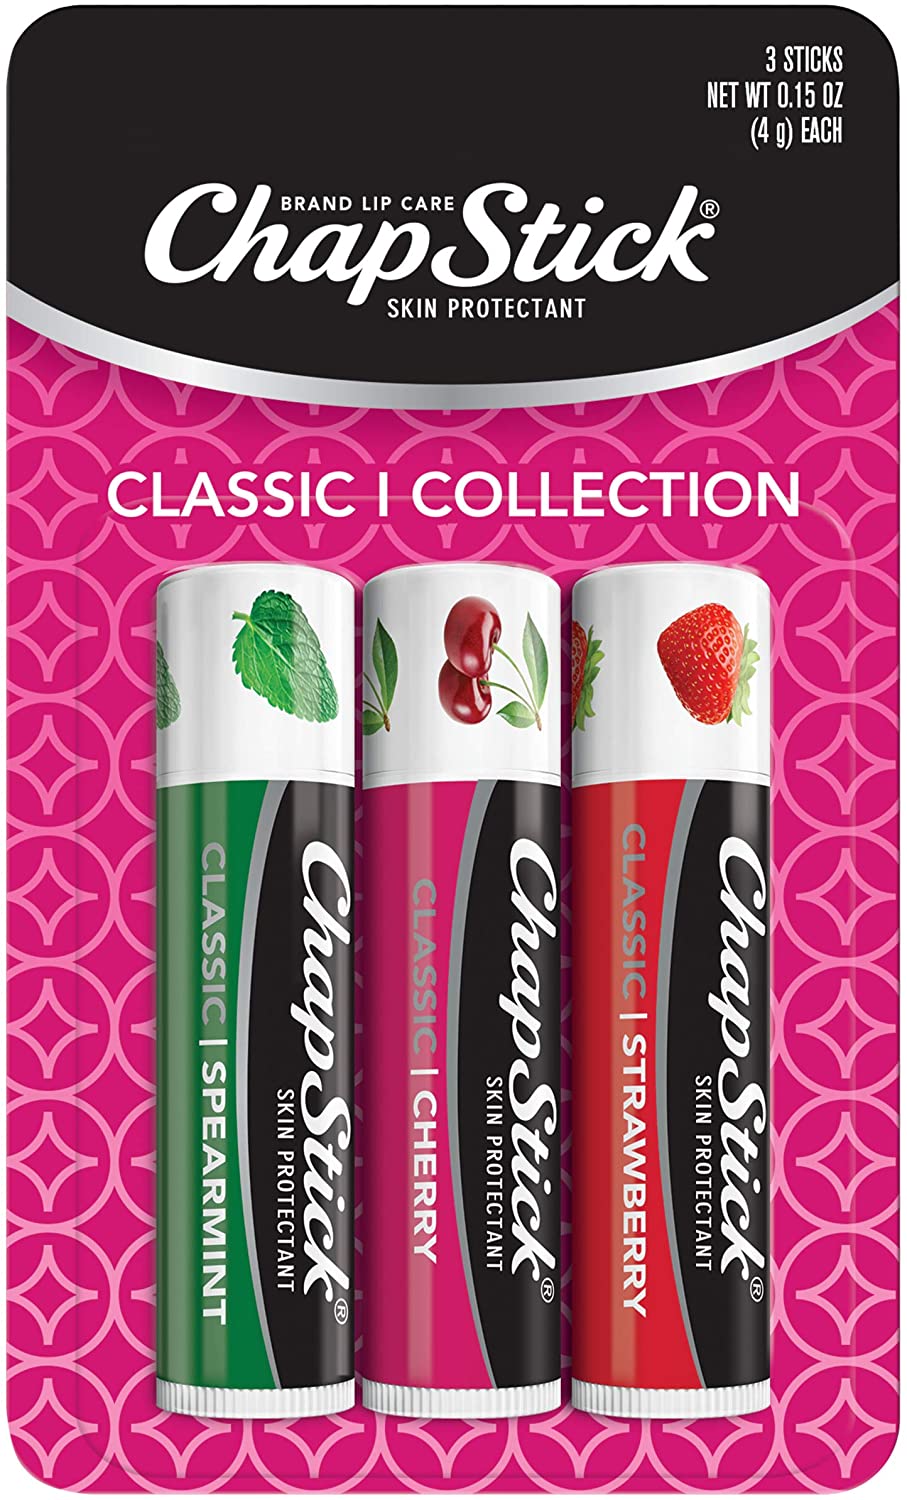 ChapStick Classic Lip Balm Tubes Variety Pack (Cherry/Strawberry/Spearmint) $2.31 w/ S&S + Free Shipping w/ Prime or on $25